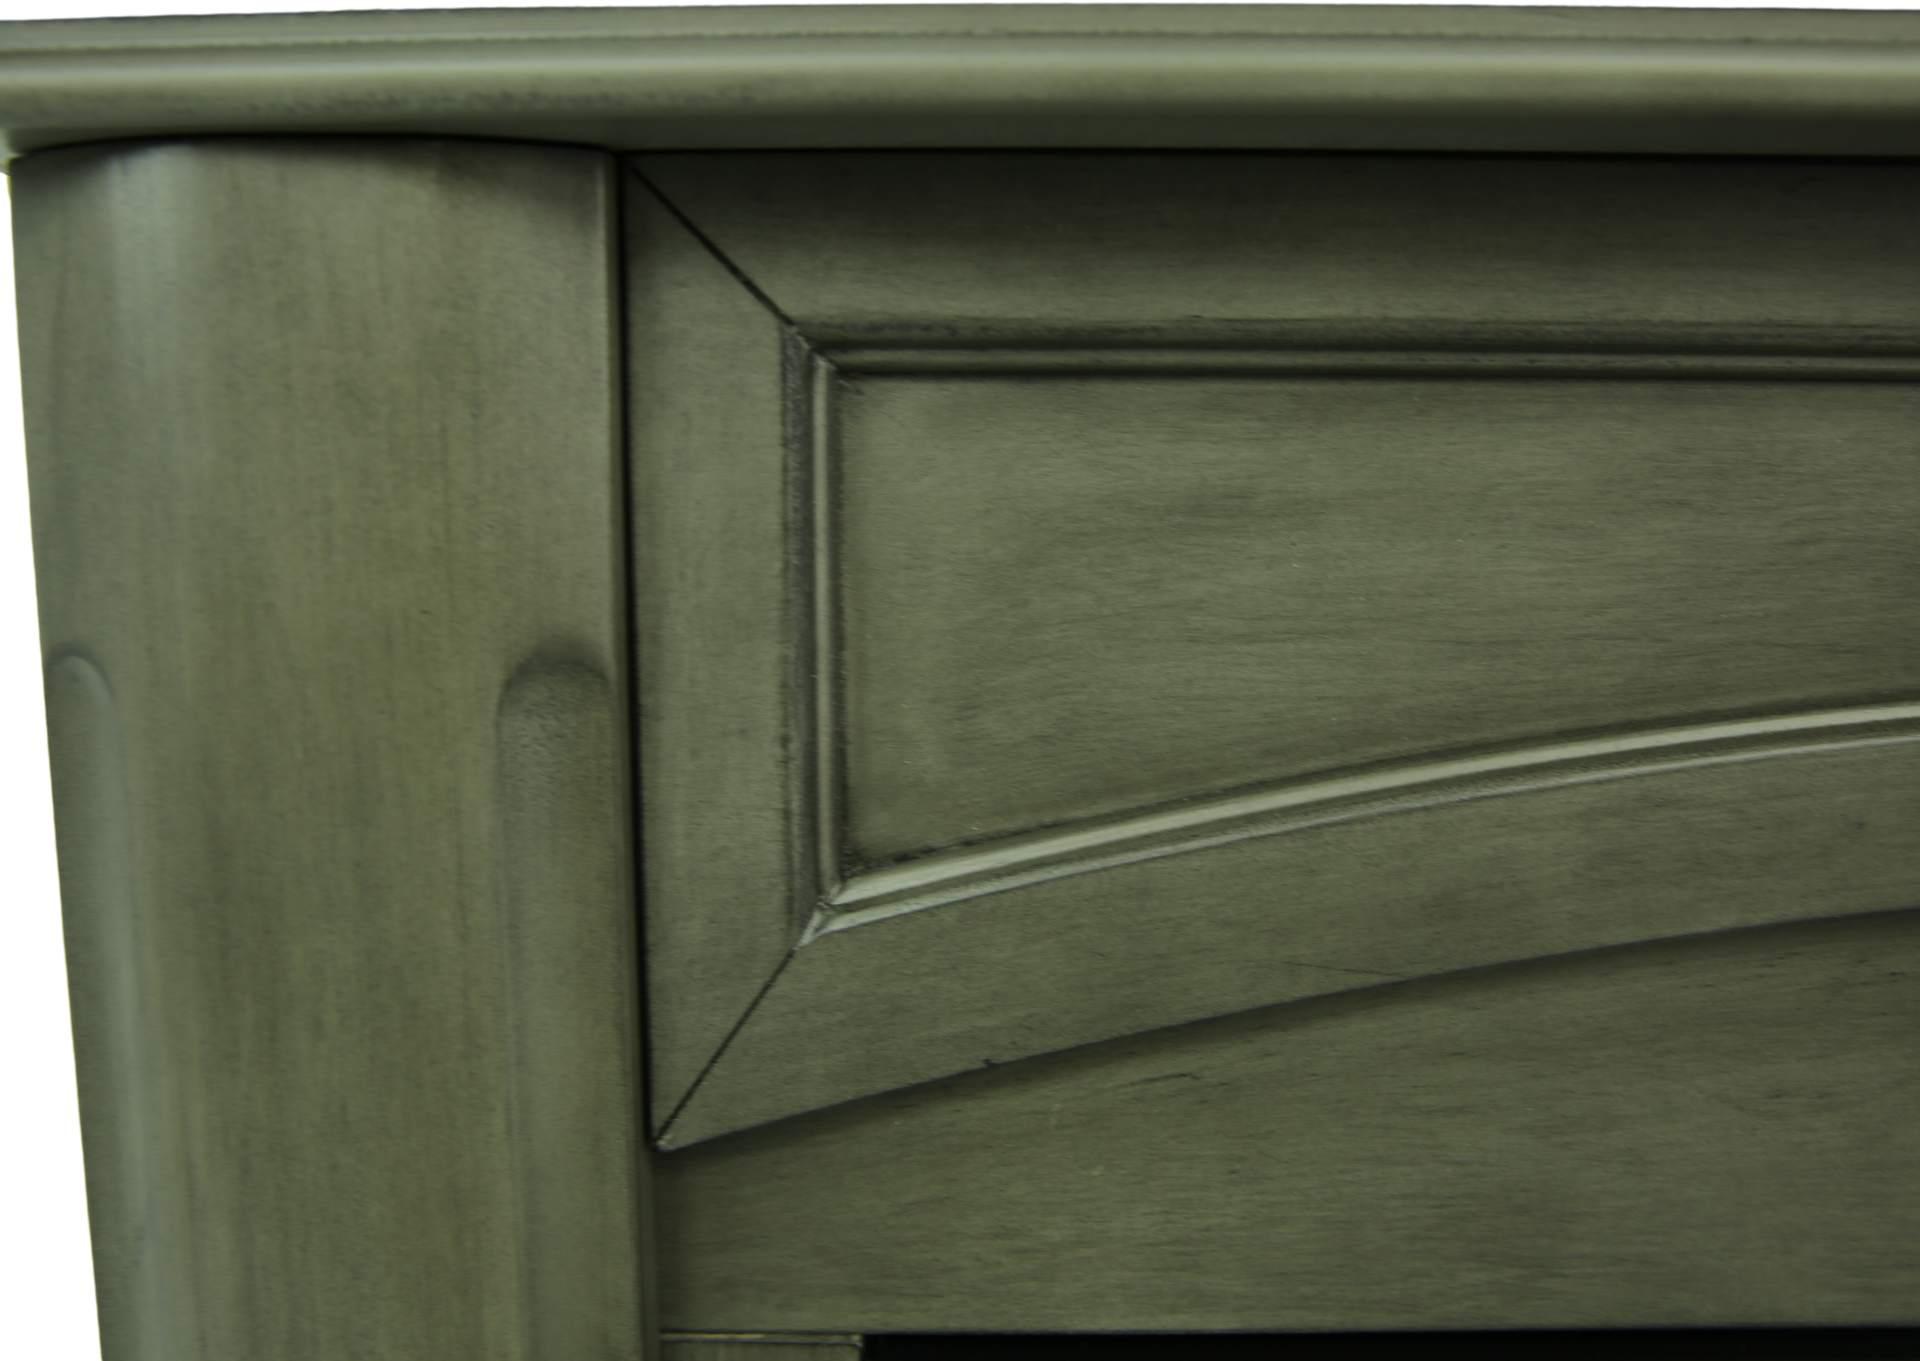 MILAN GRAY FIREPLACE WITH INSERT,KITH FURNITURE